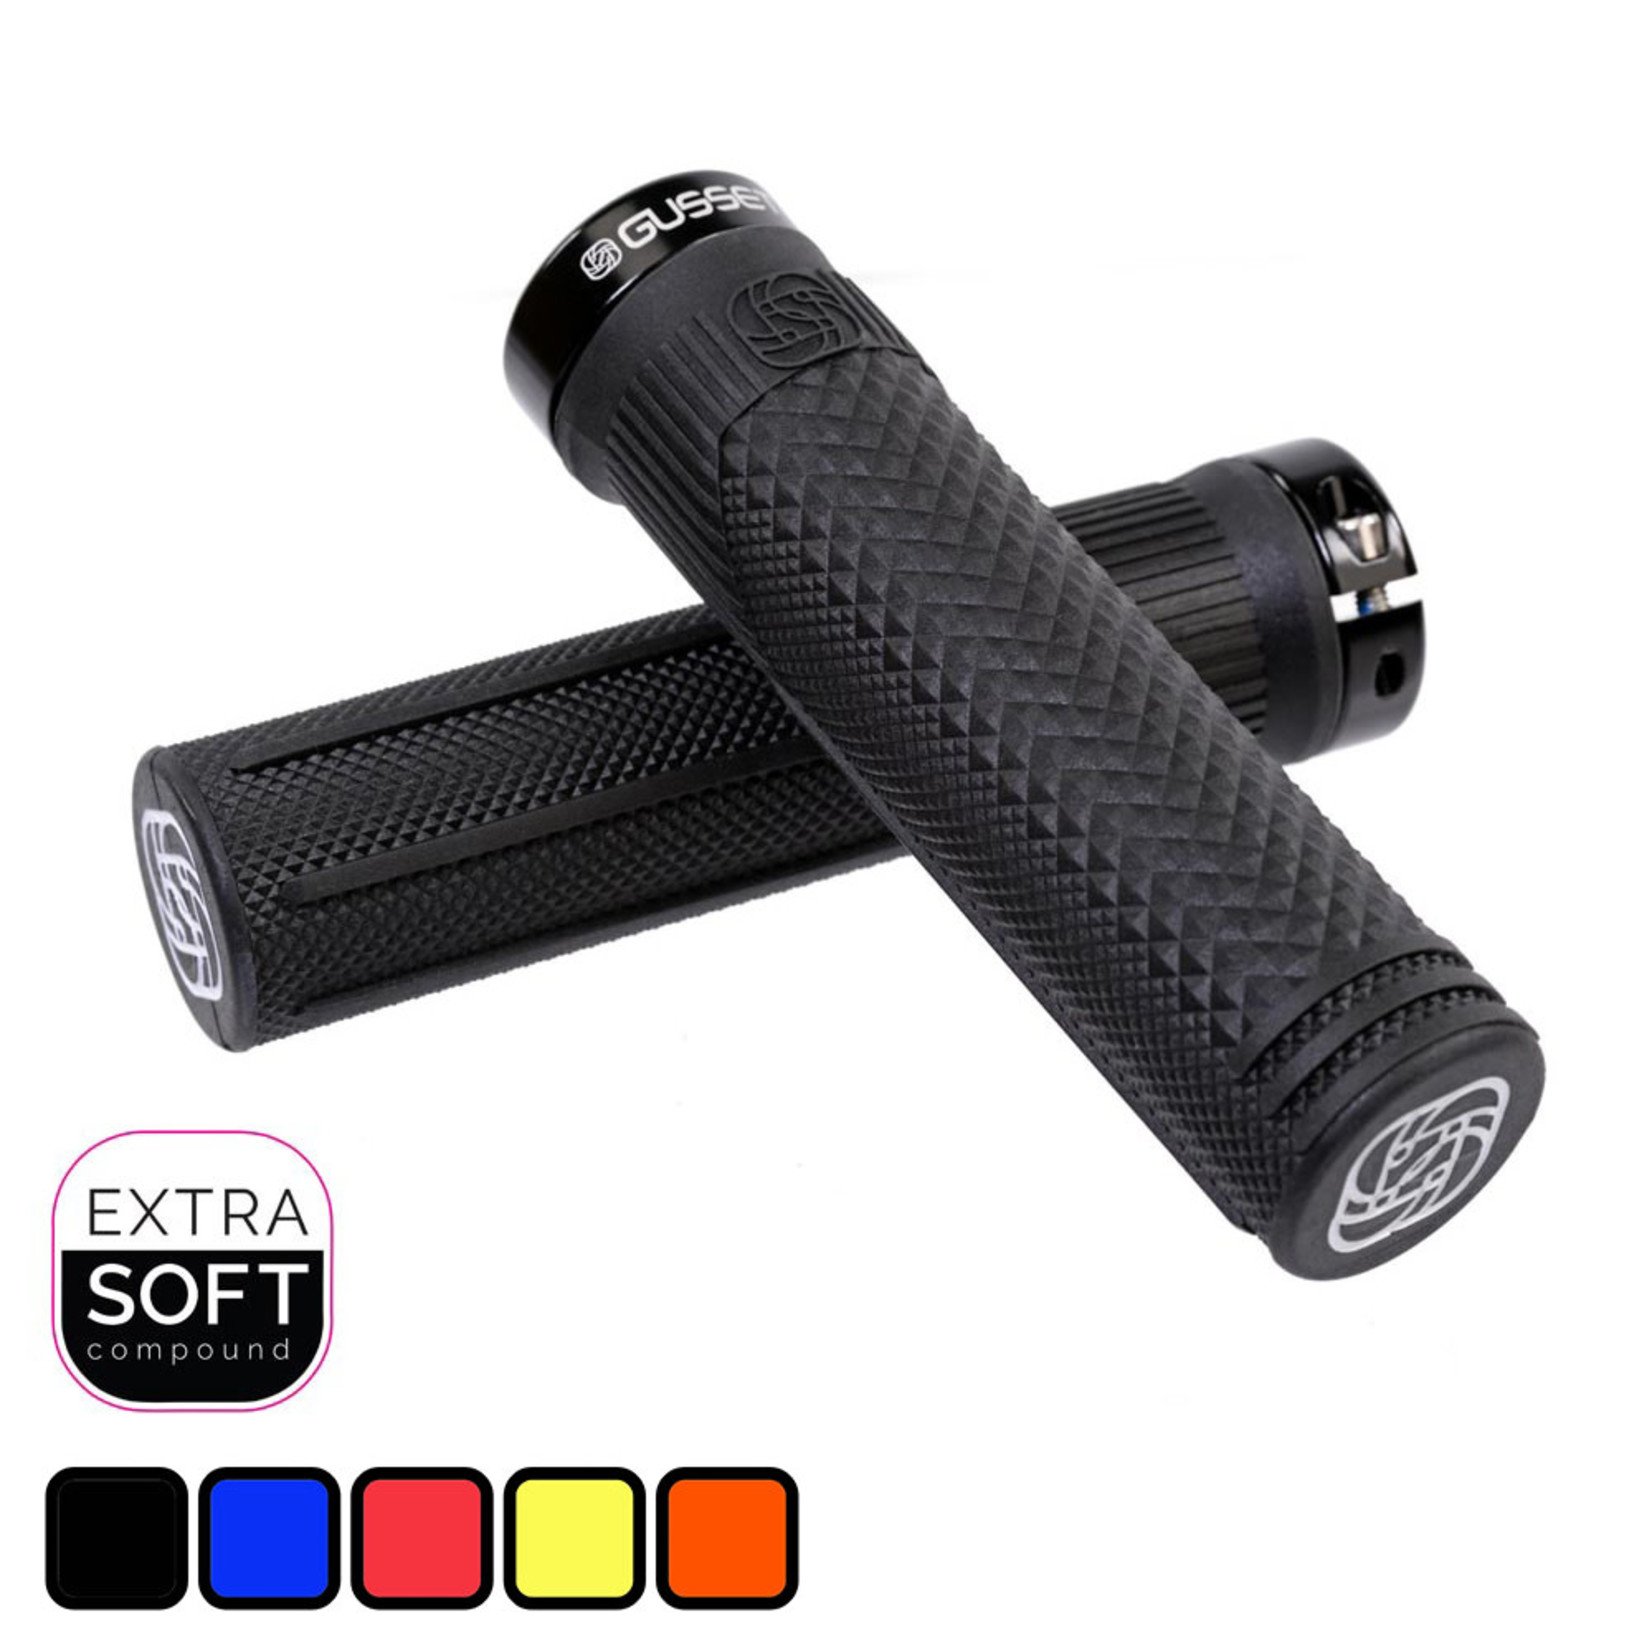 Gusset S2 Lock On Grips - Extra Soft